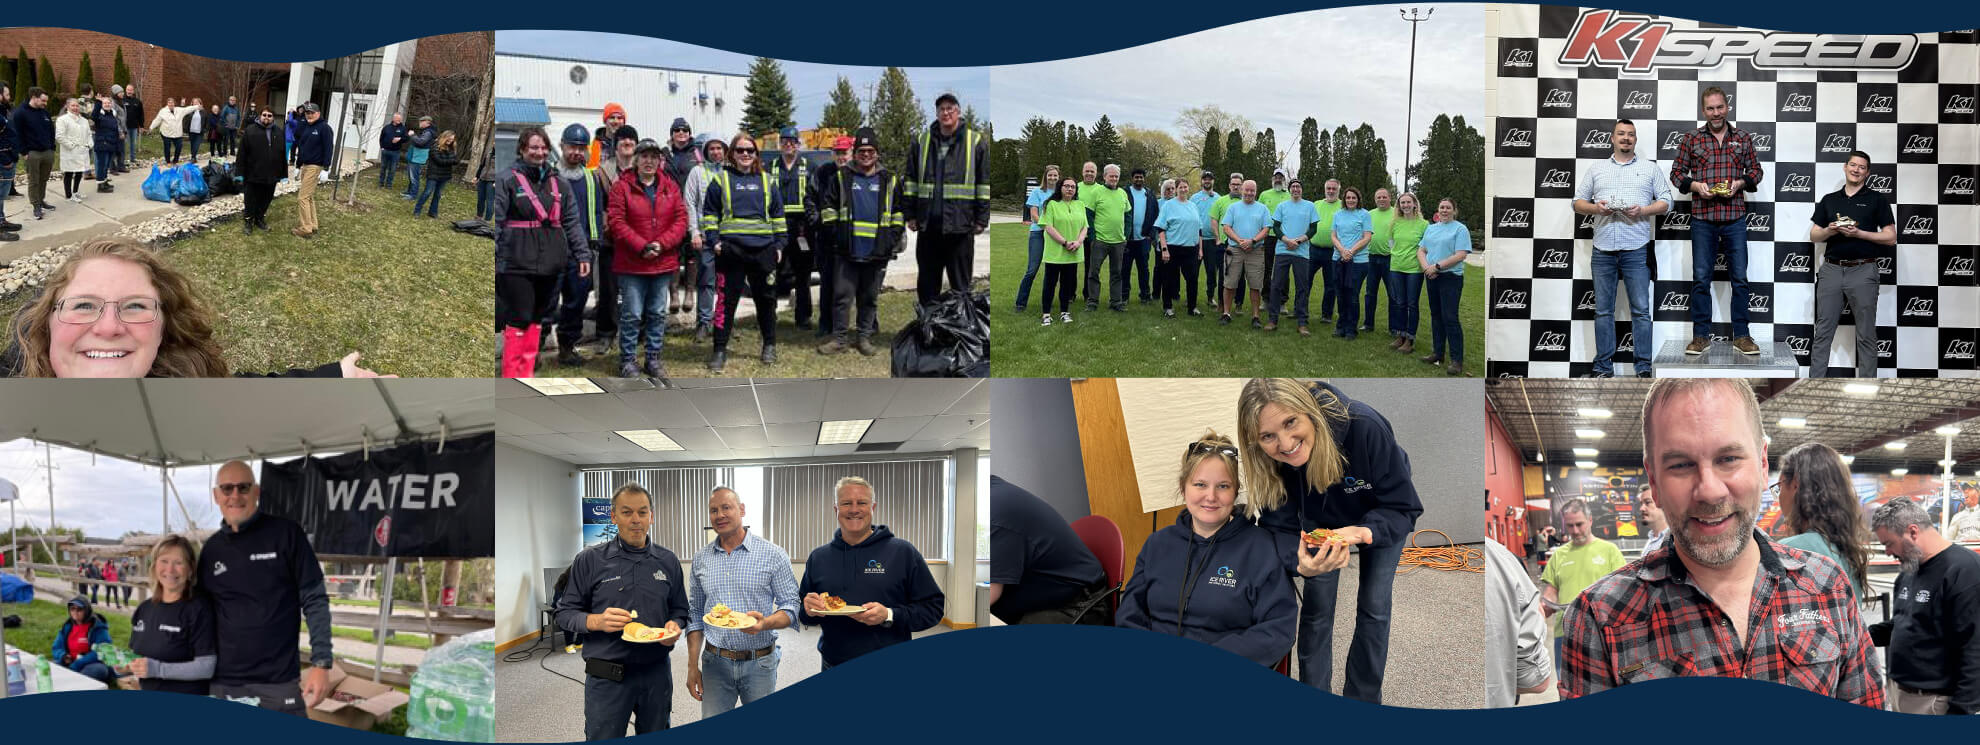 Photo Collage of Ice River staff at various company events